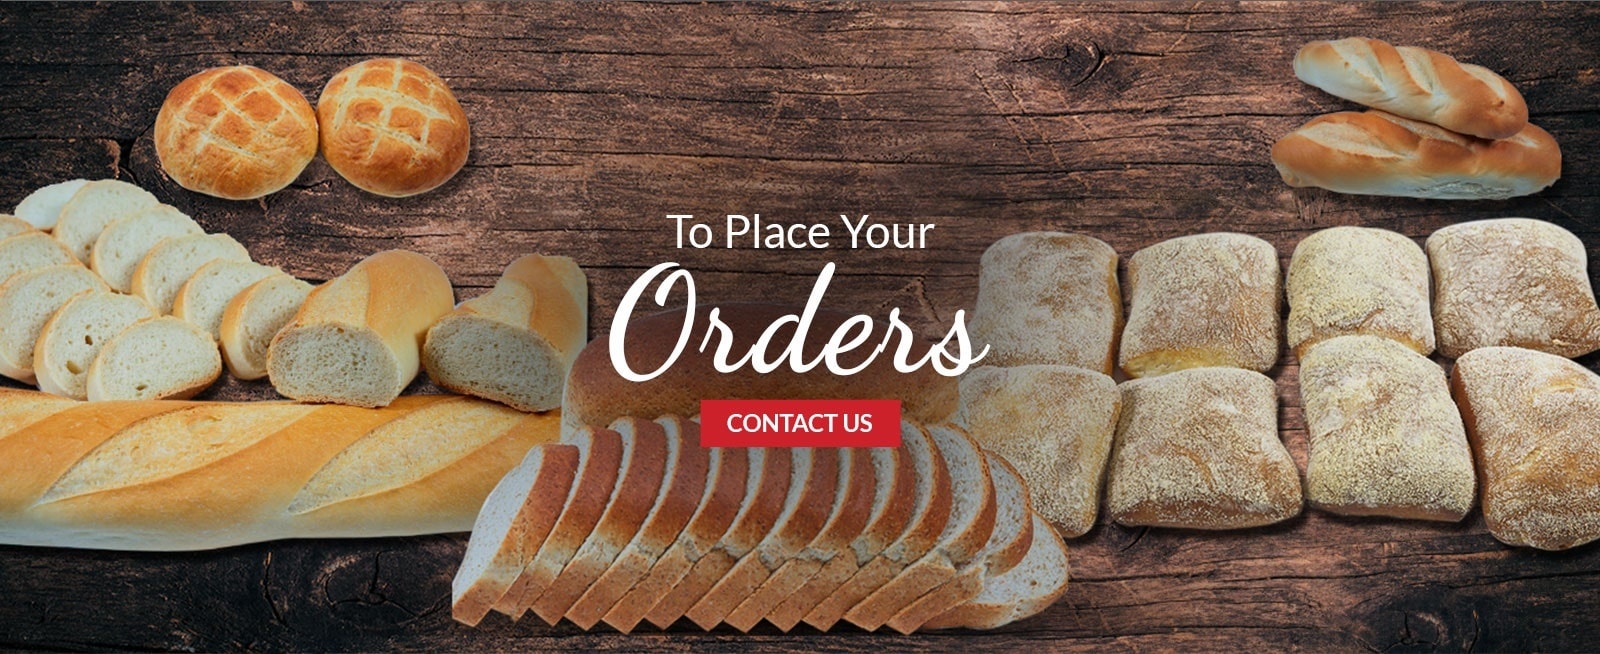 To Place Your Orders for Breads - Contact Us at The Brick Oven Bakery in Burlington ON